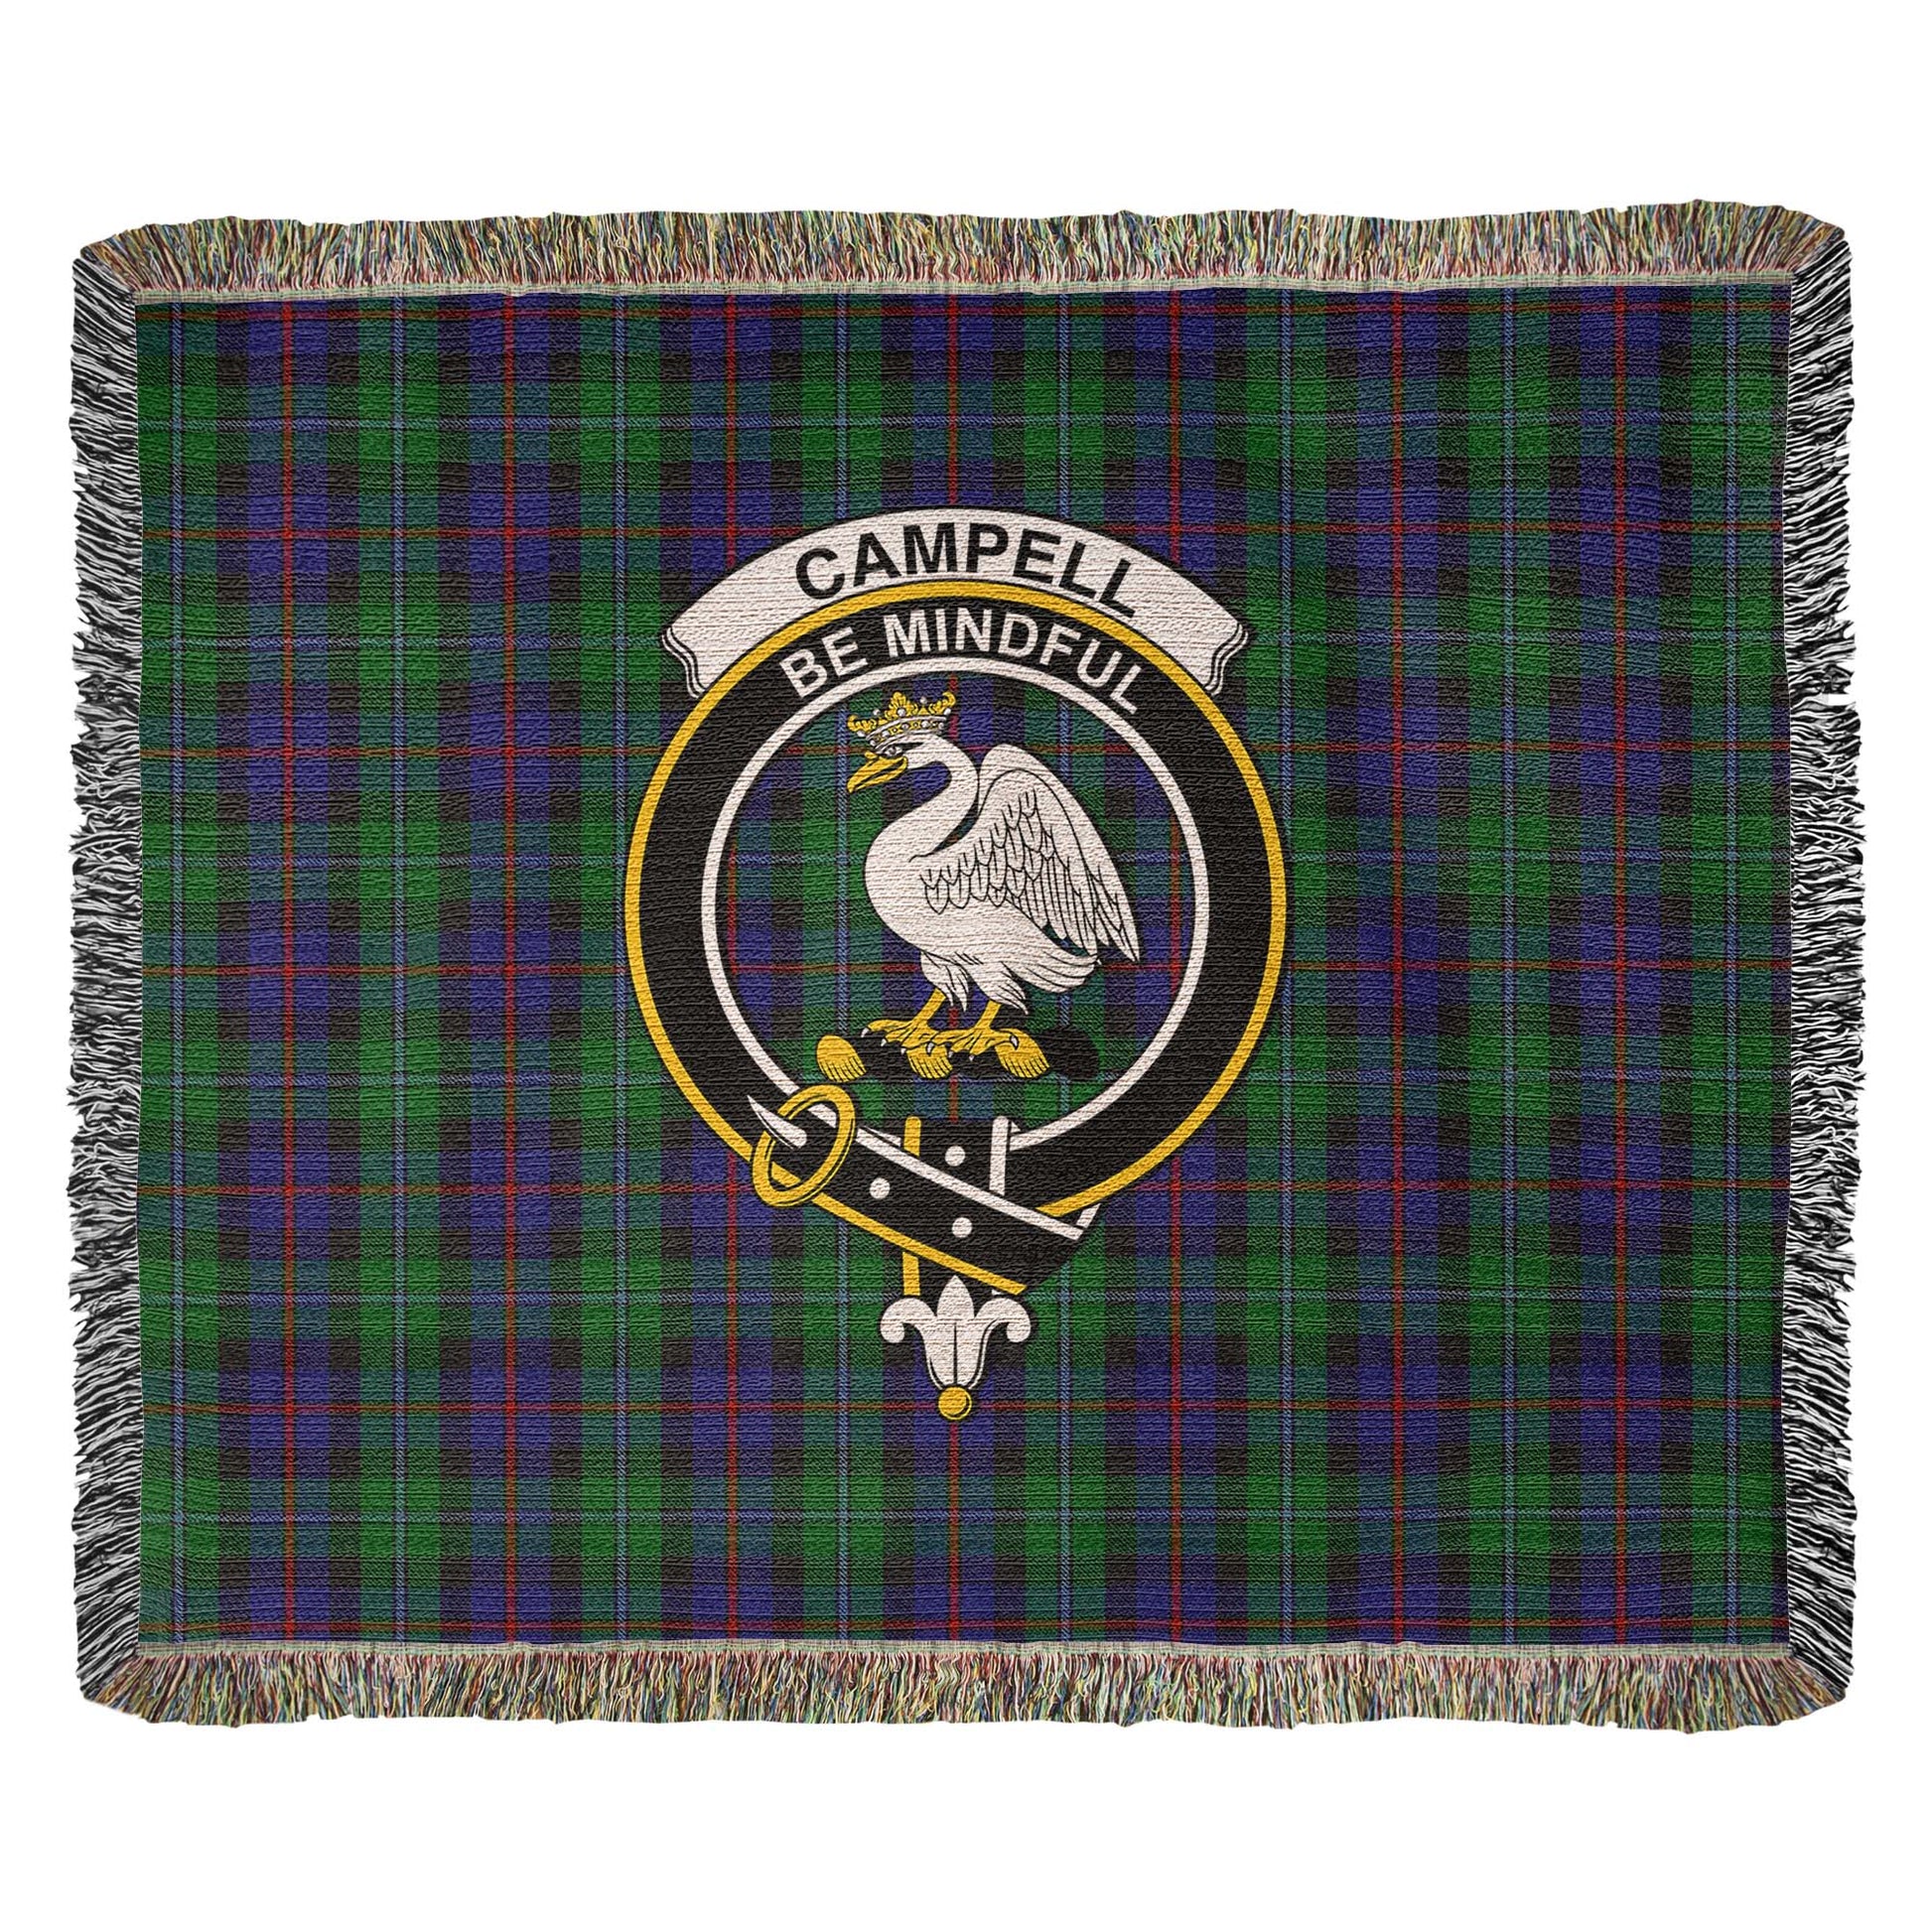 Tartan Vibes Clothing Campbell of Cawdor Tartan Woven Blanket with Family Crest